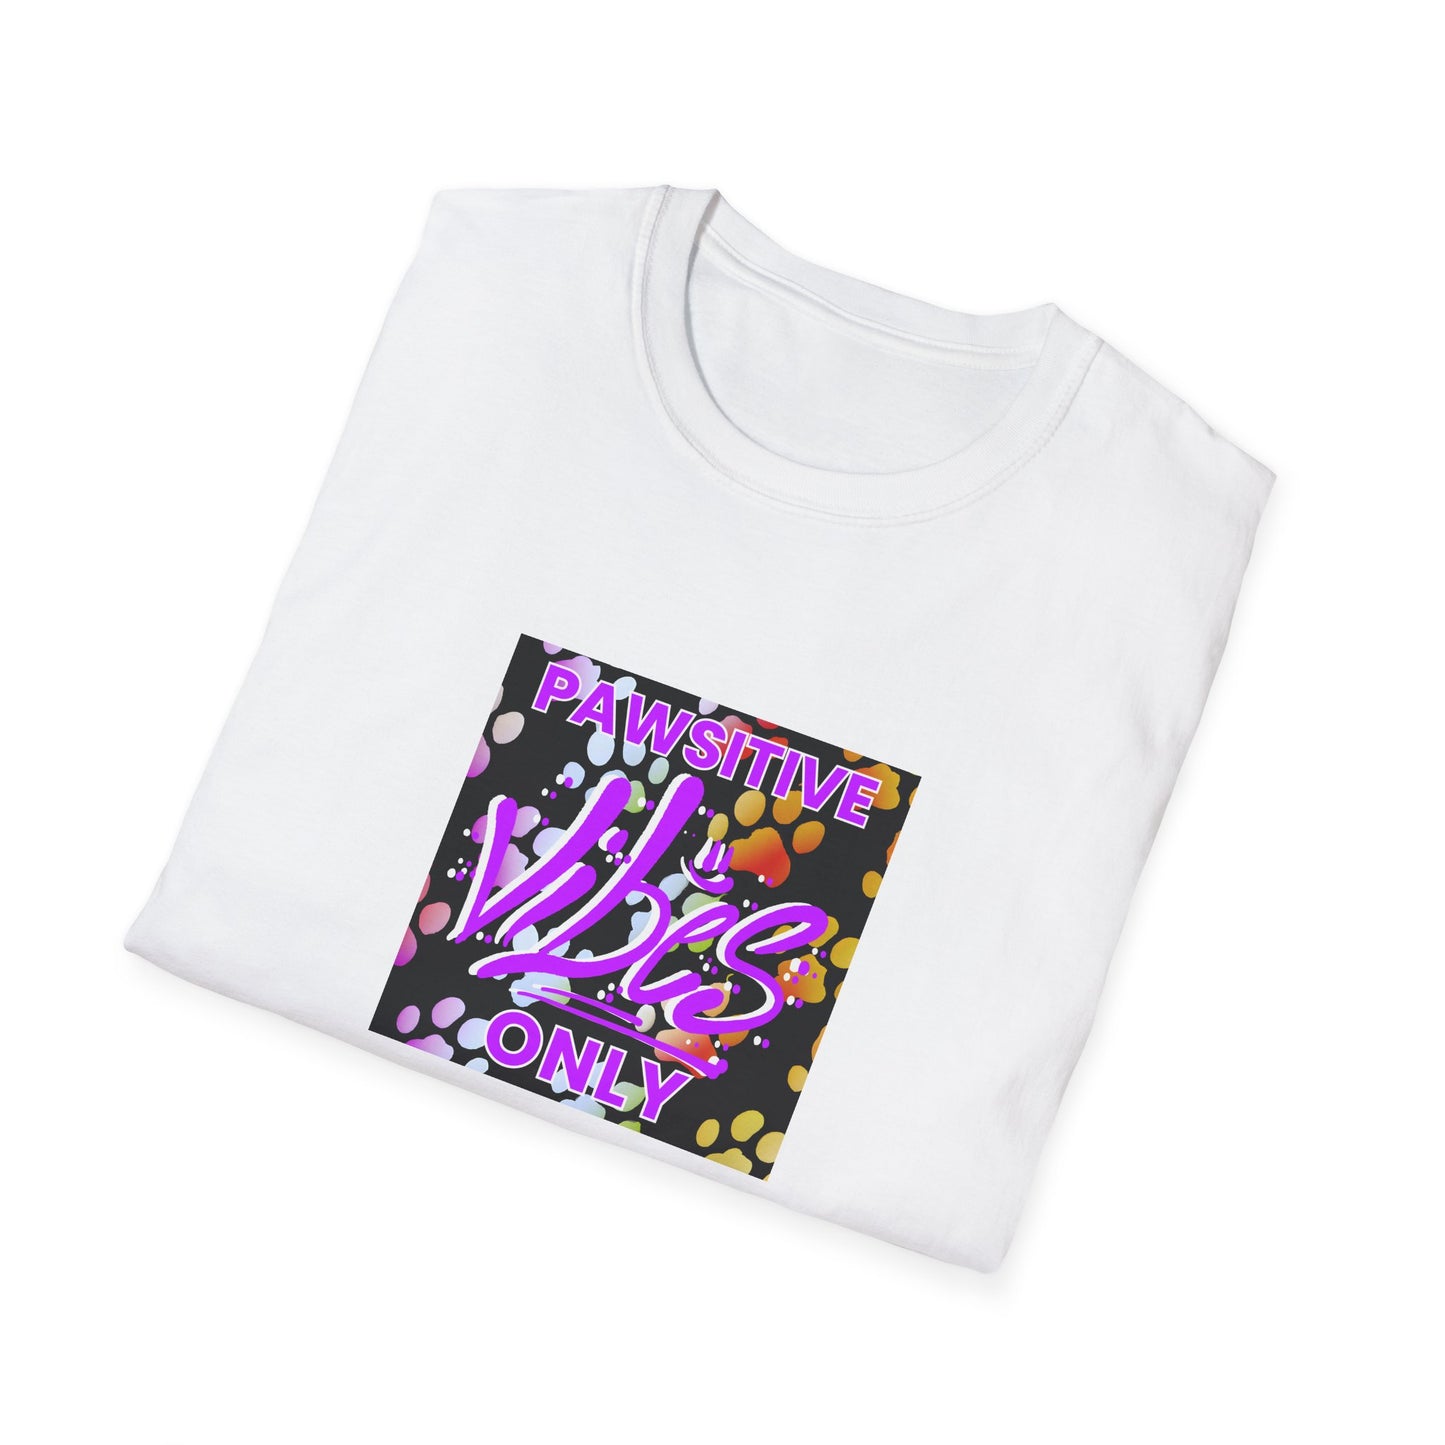 Posi-Pam Walden - "Pawsitive Vibes Only" Unisex Tee